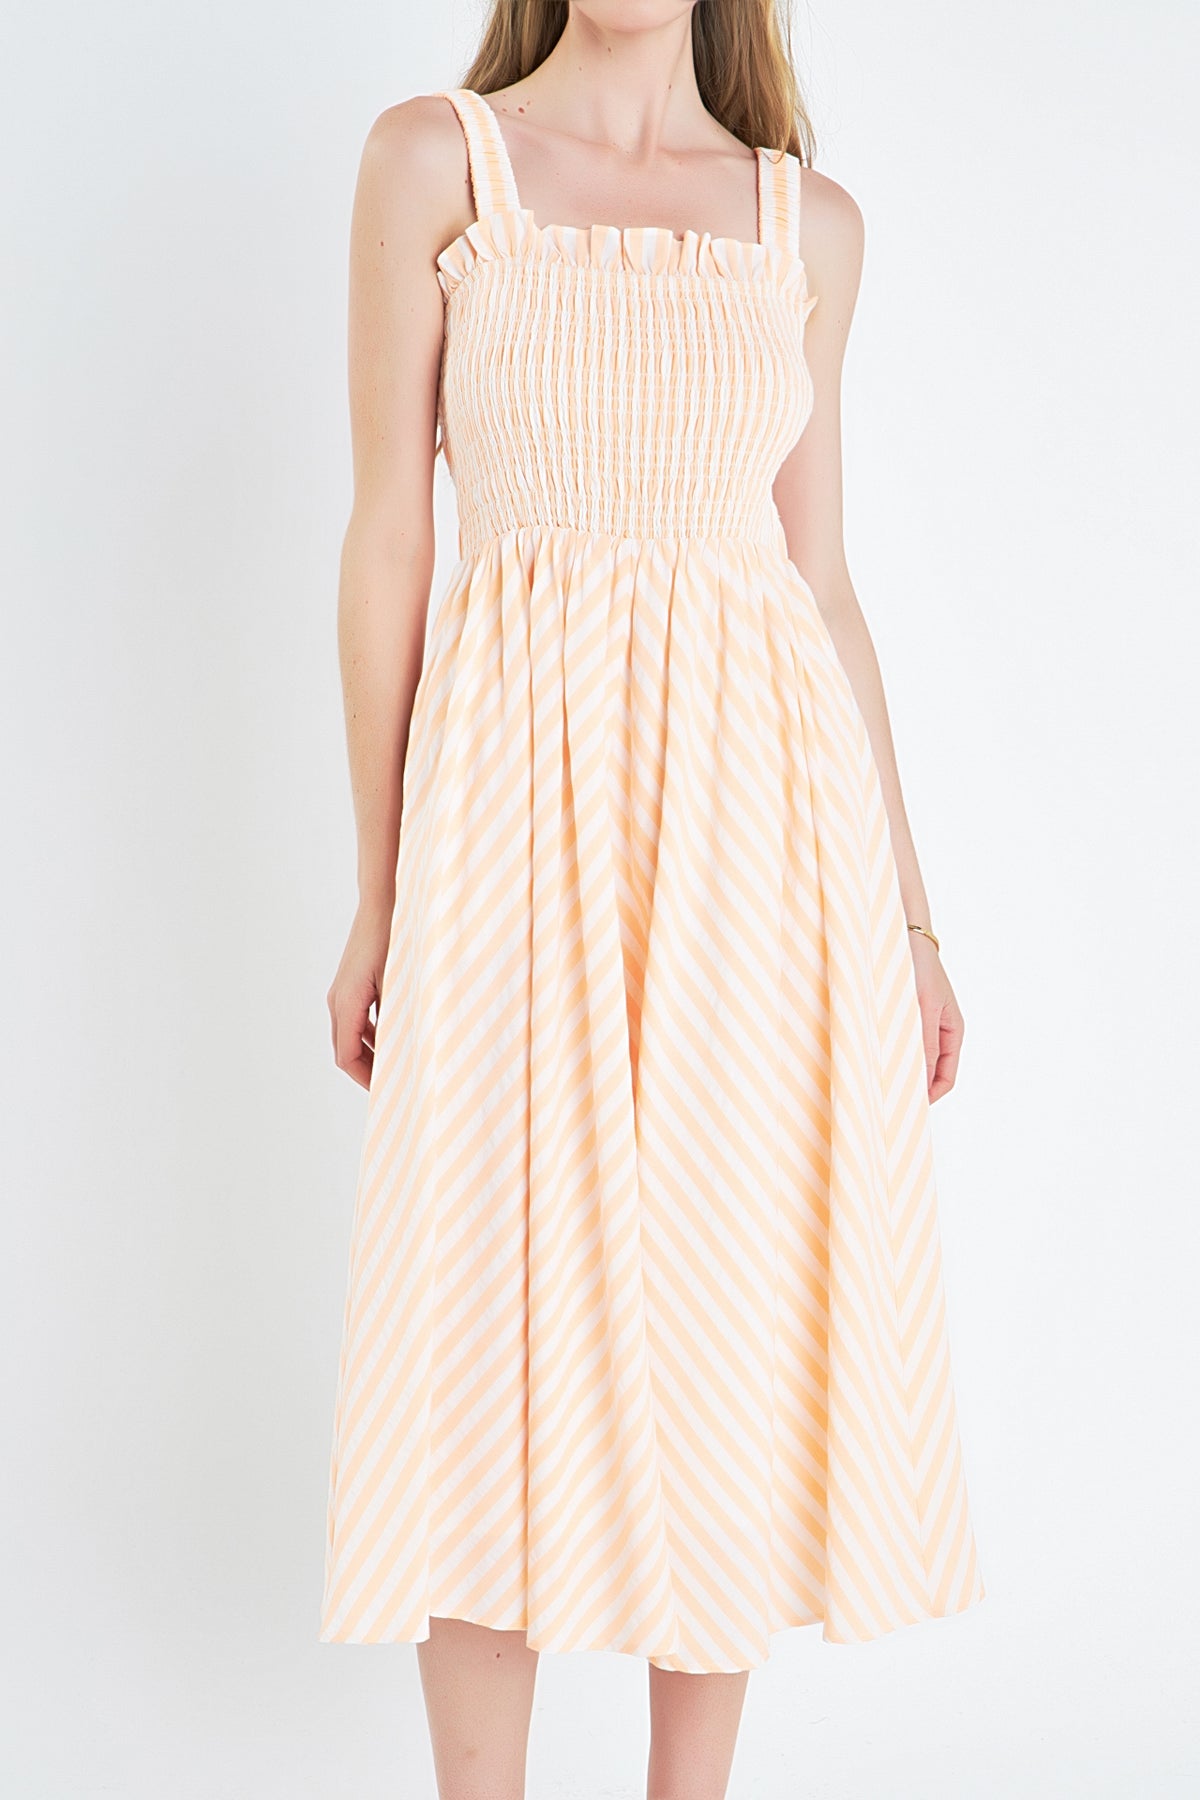 ENGLISH FACTORY - Striped Smocked Midi Dress - DRESSES available at Objectrare